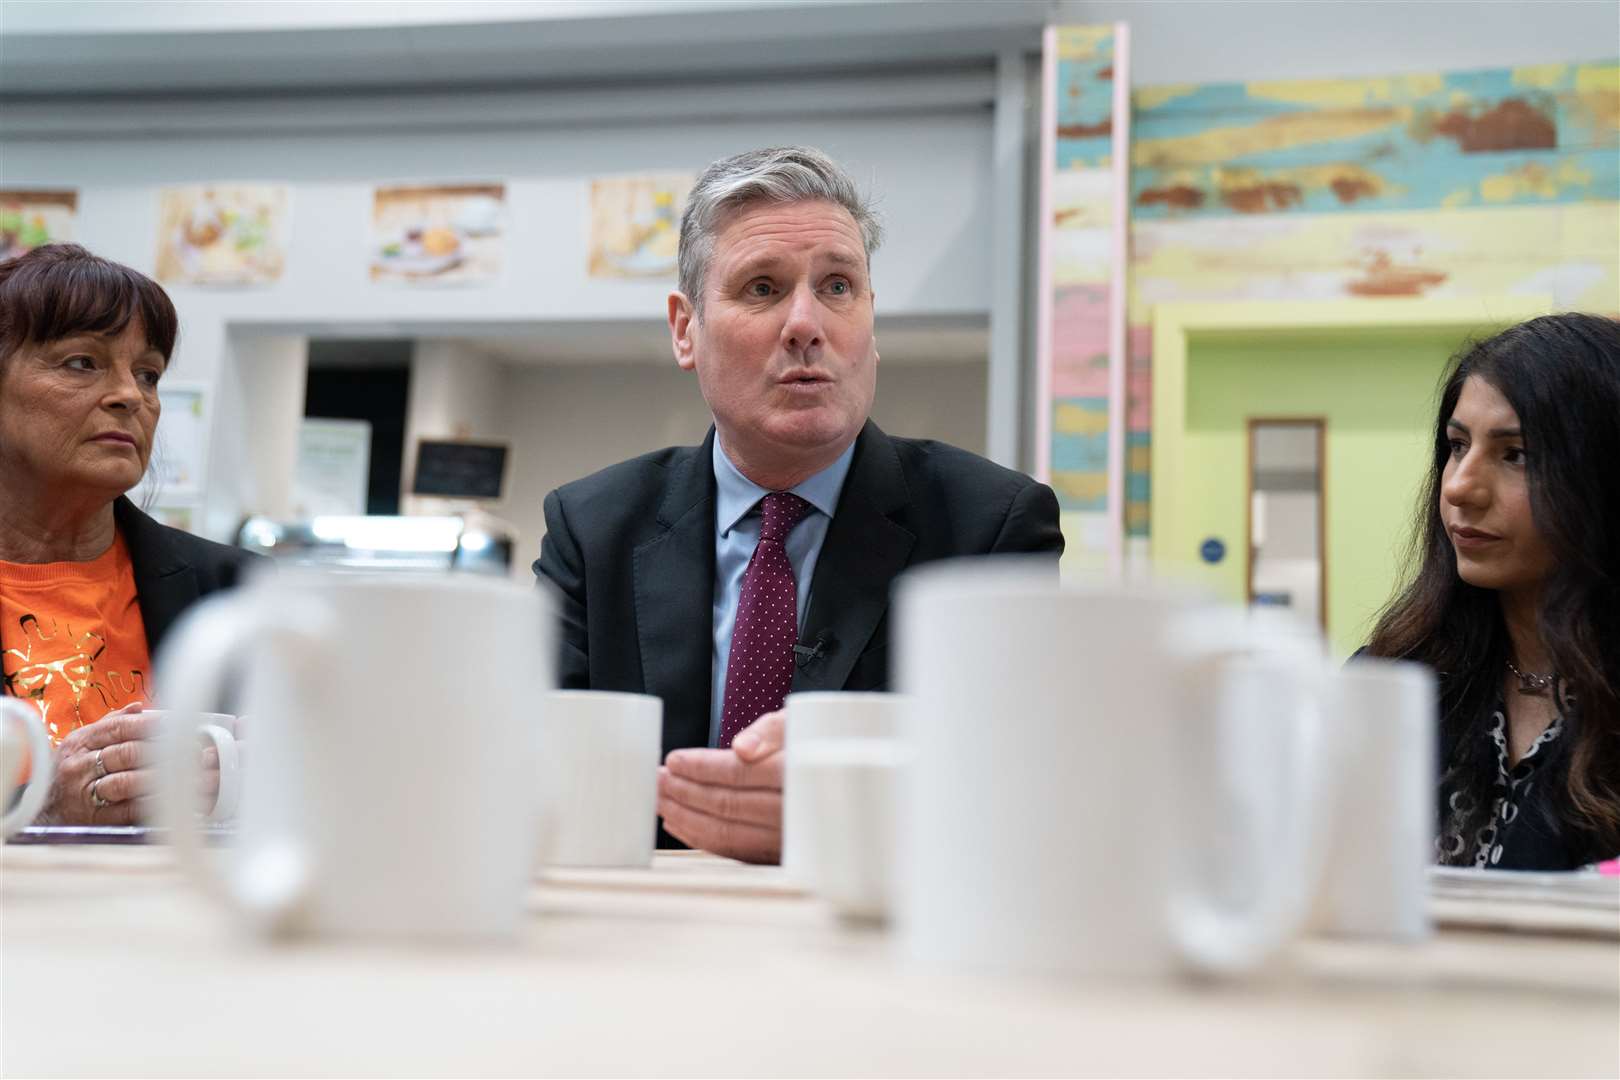 Labour leader Sir Keir Starmer said he made ‘zero apologies’ for the under-fire advert (Stefan Rouseau/PA)